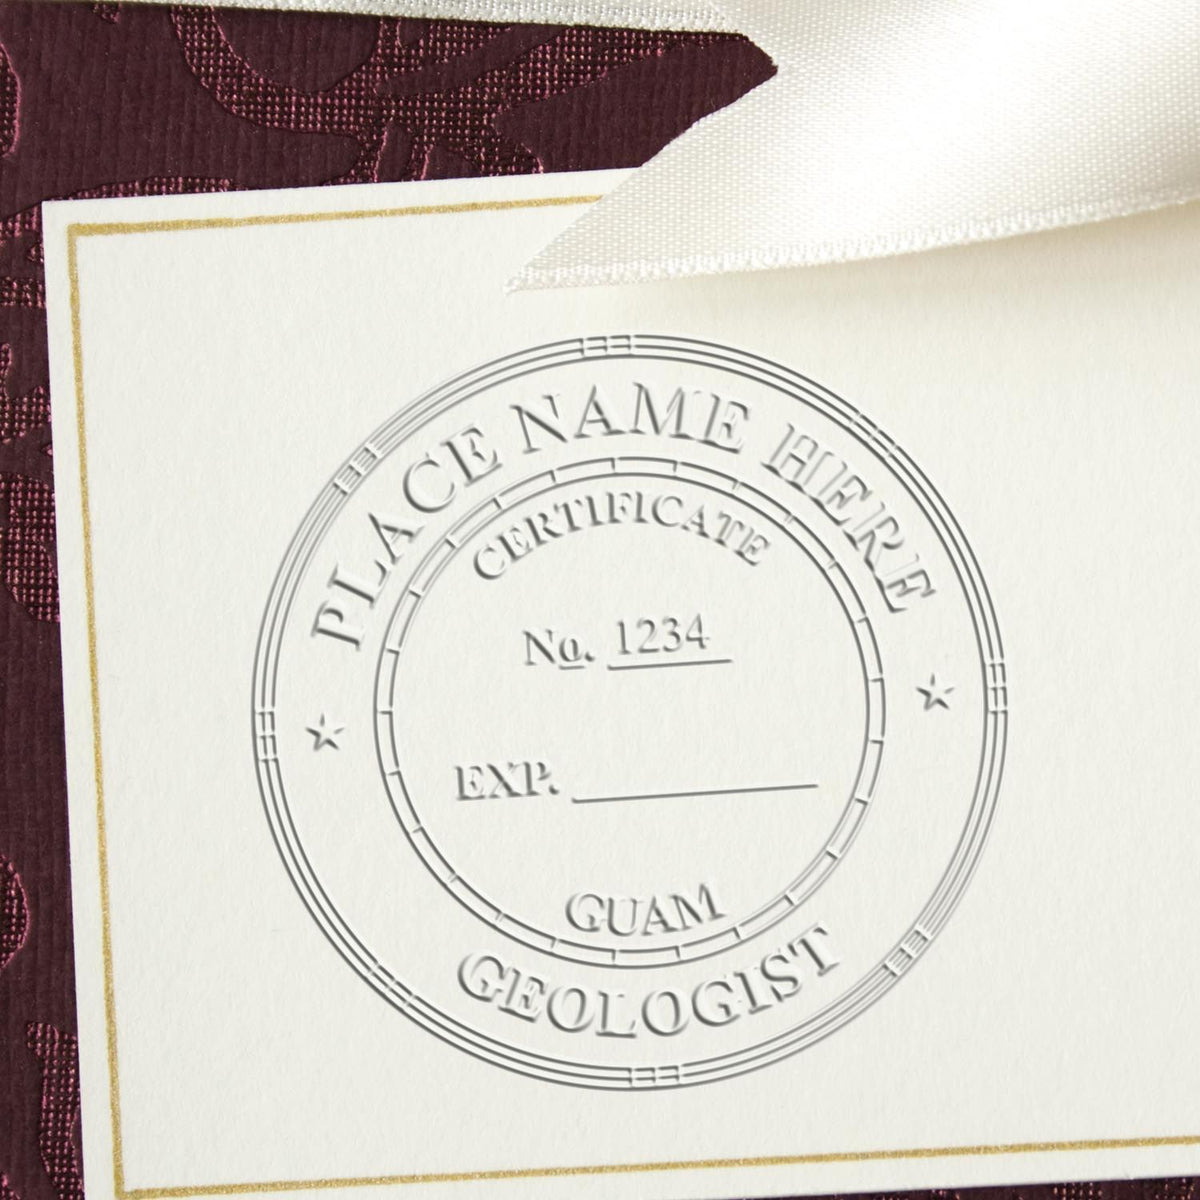 An in use photo of the Gift Guam Geologist Seal showing a sample imprint on a cardstock